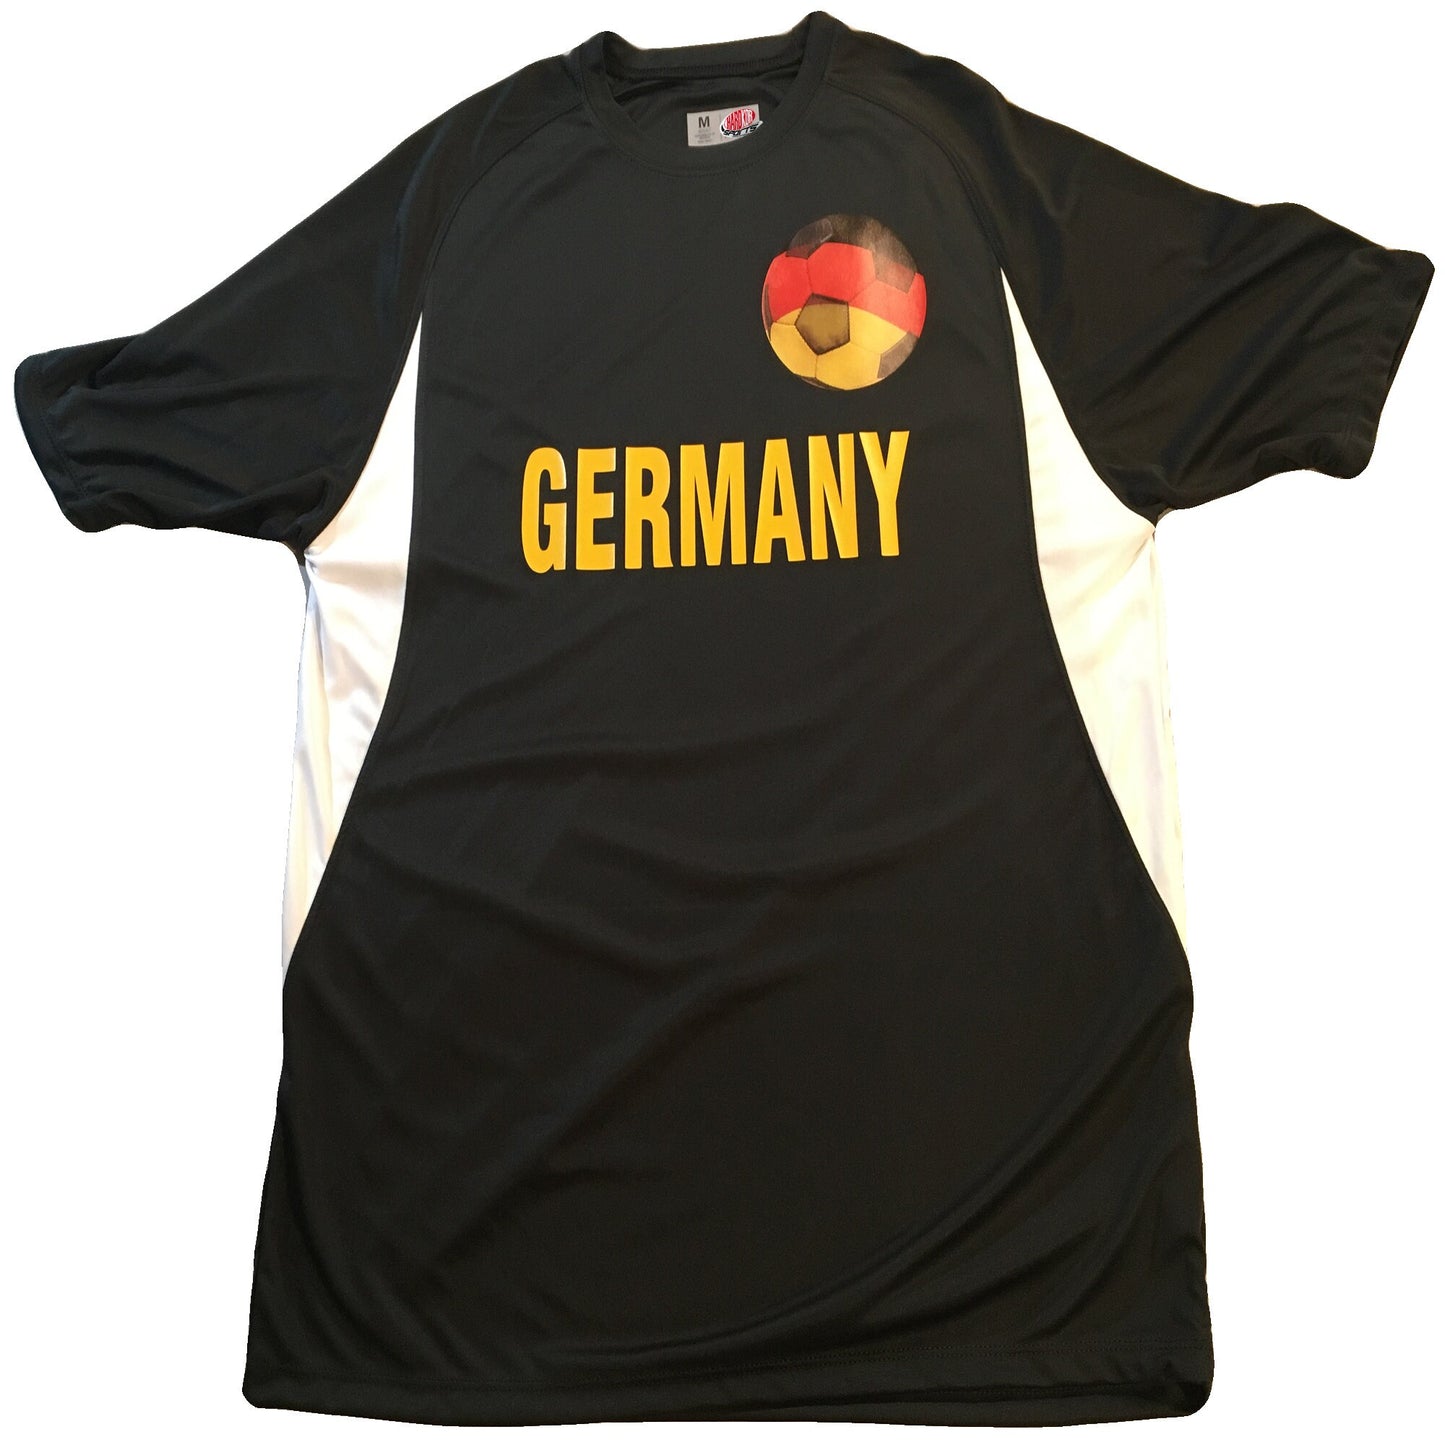 Germany Soccer Jersey German Shield Design Customized with Your Names and Numbers in Your choice of Popular Colors